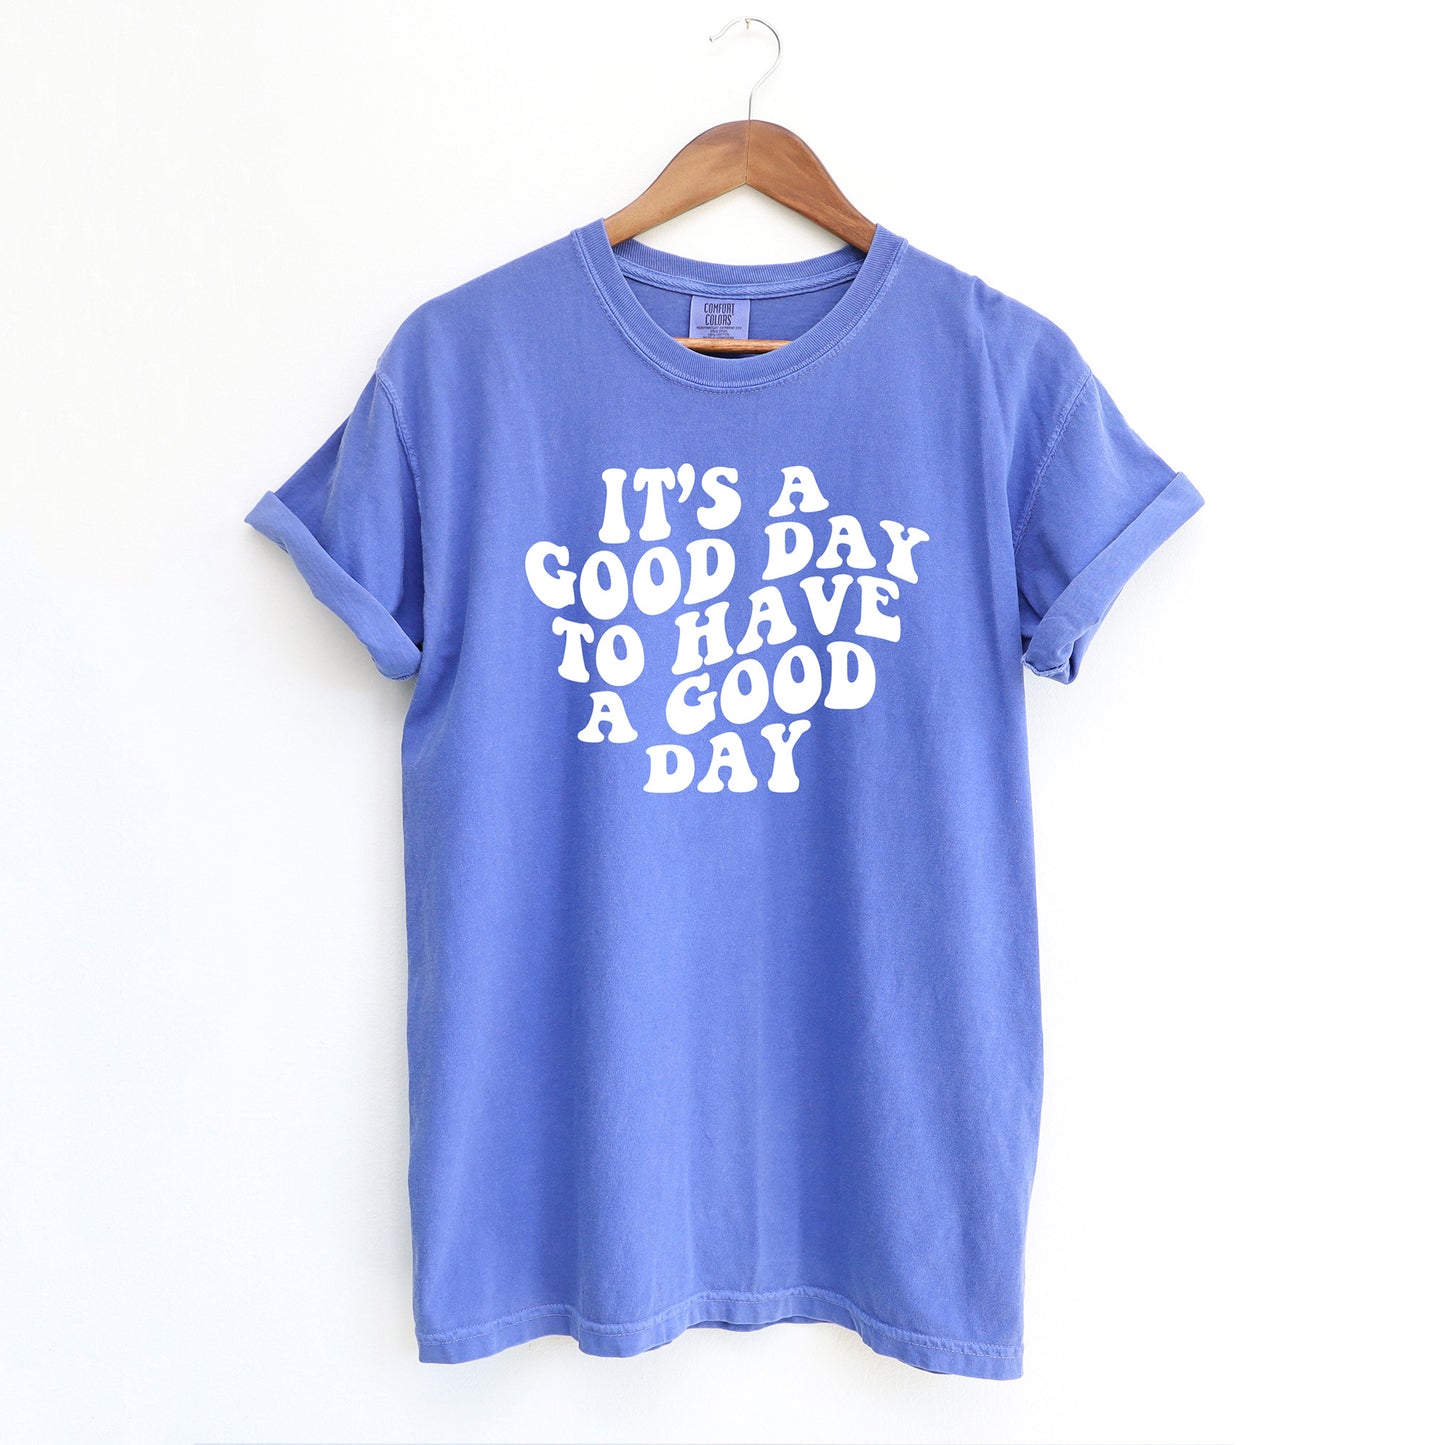 It's A Good Day To Have A Good Day | Garment Dyed Short Sleeve Tee